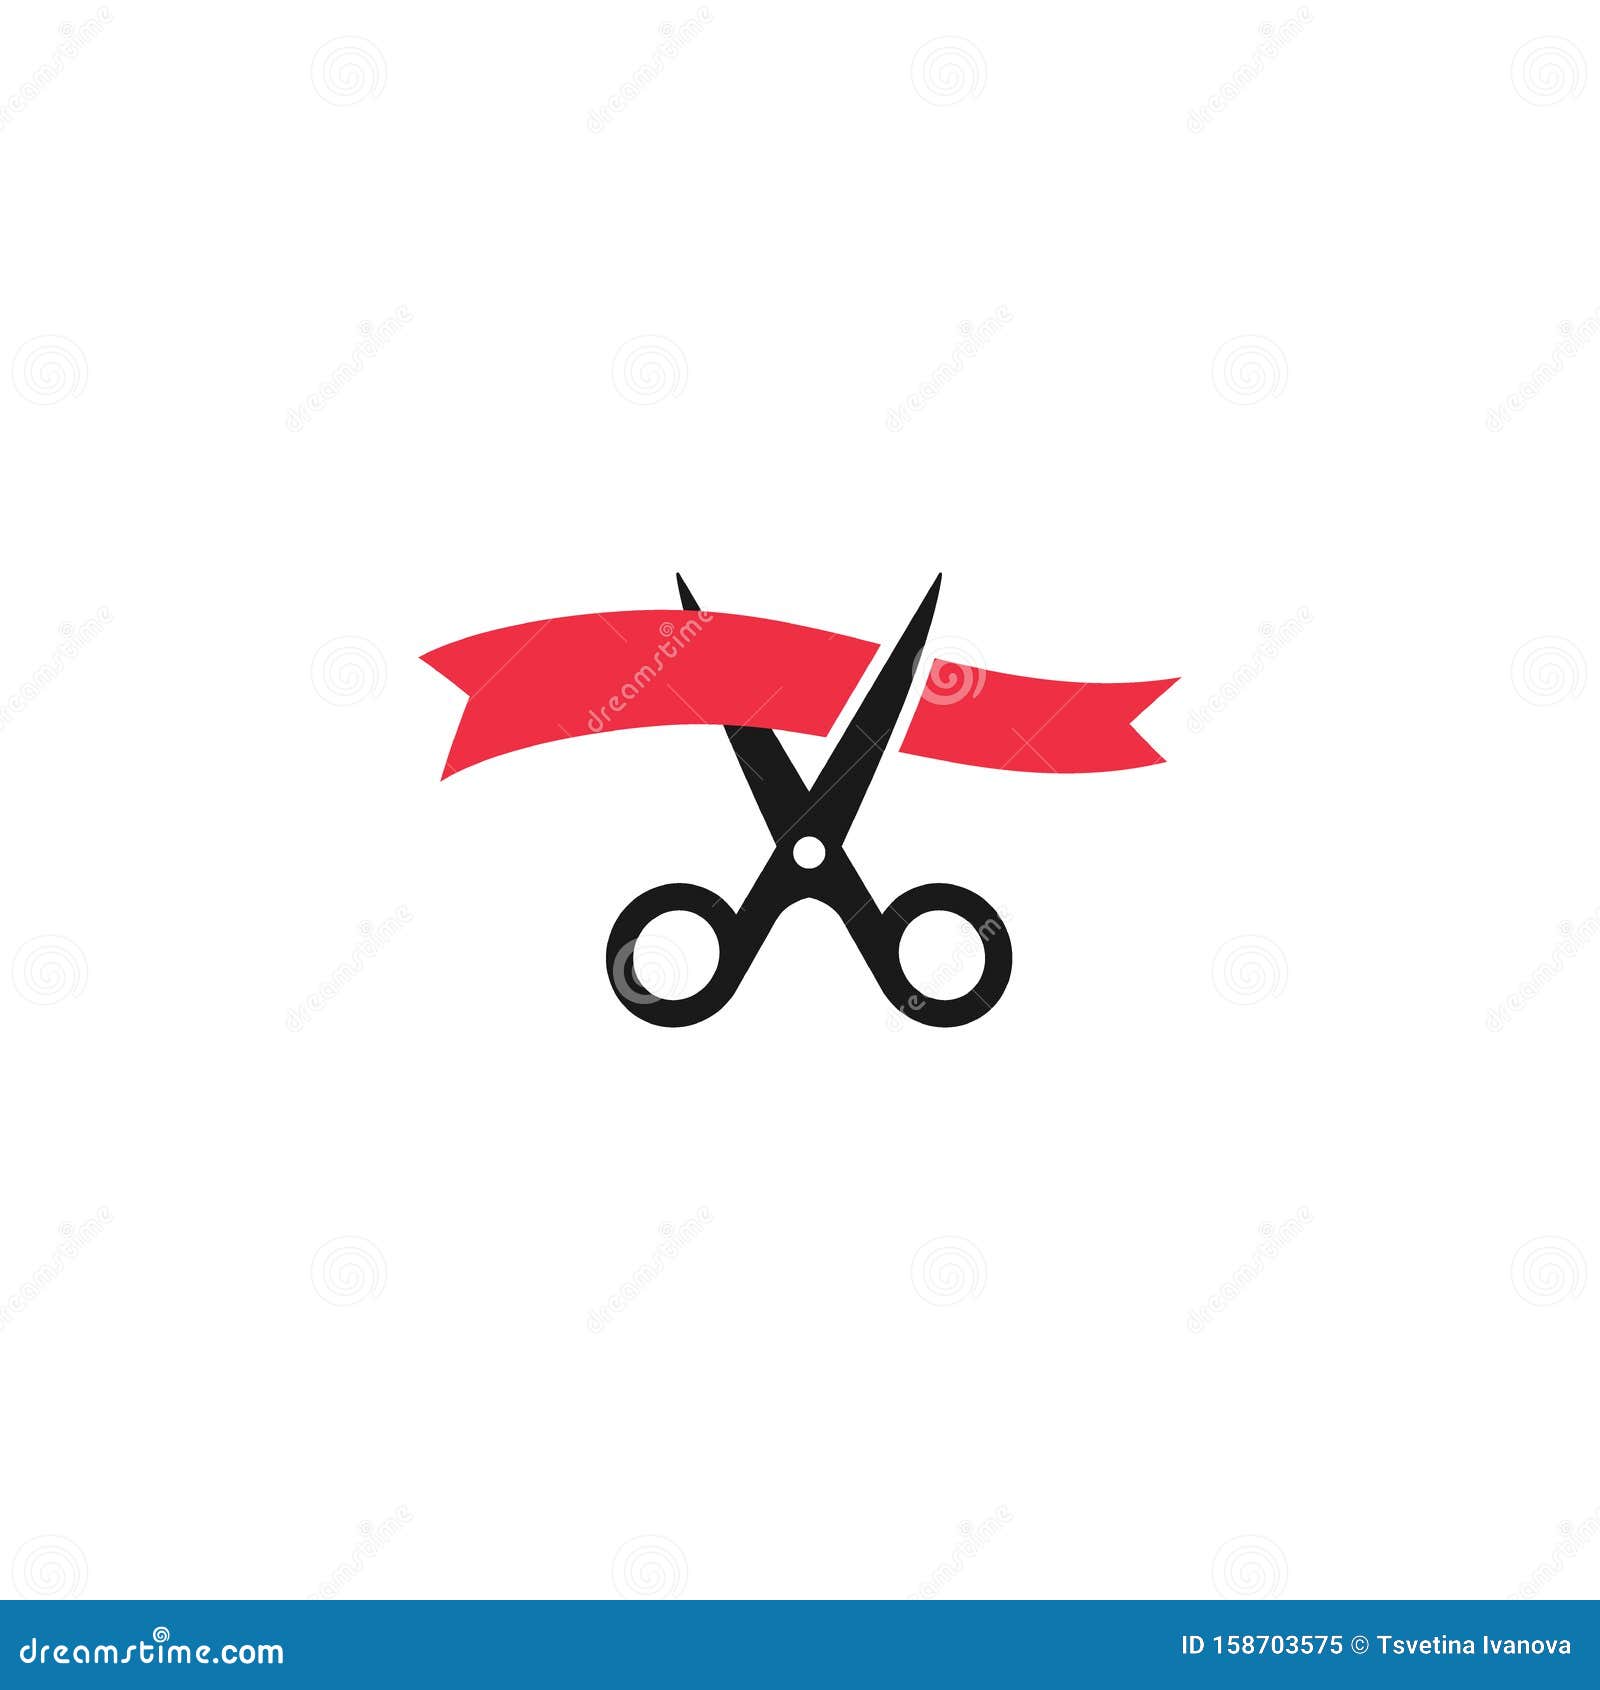 scissors cutting red waved ribbon, inauguration ceremony event  icon.